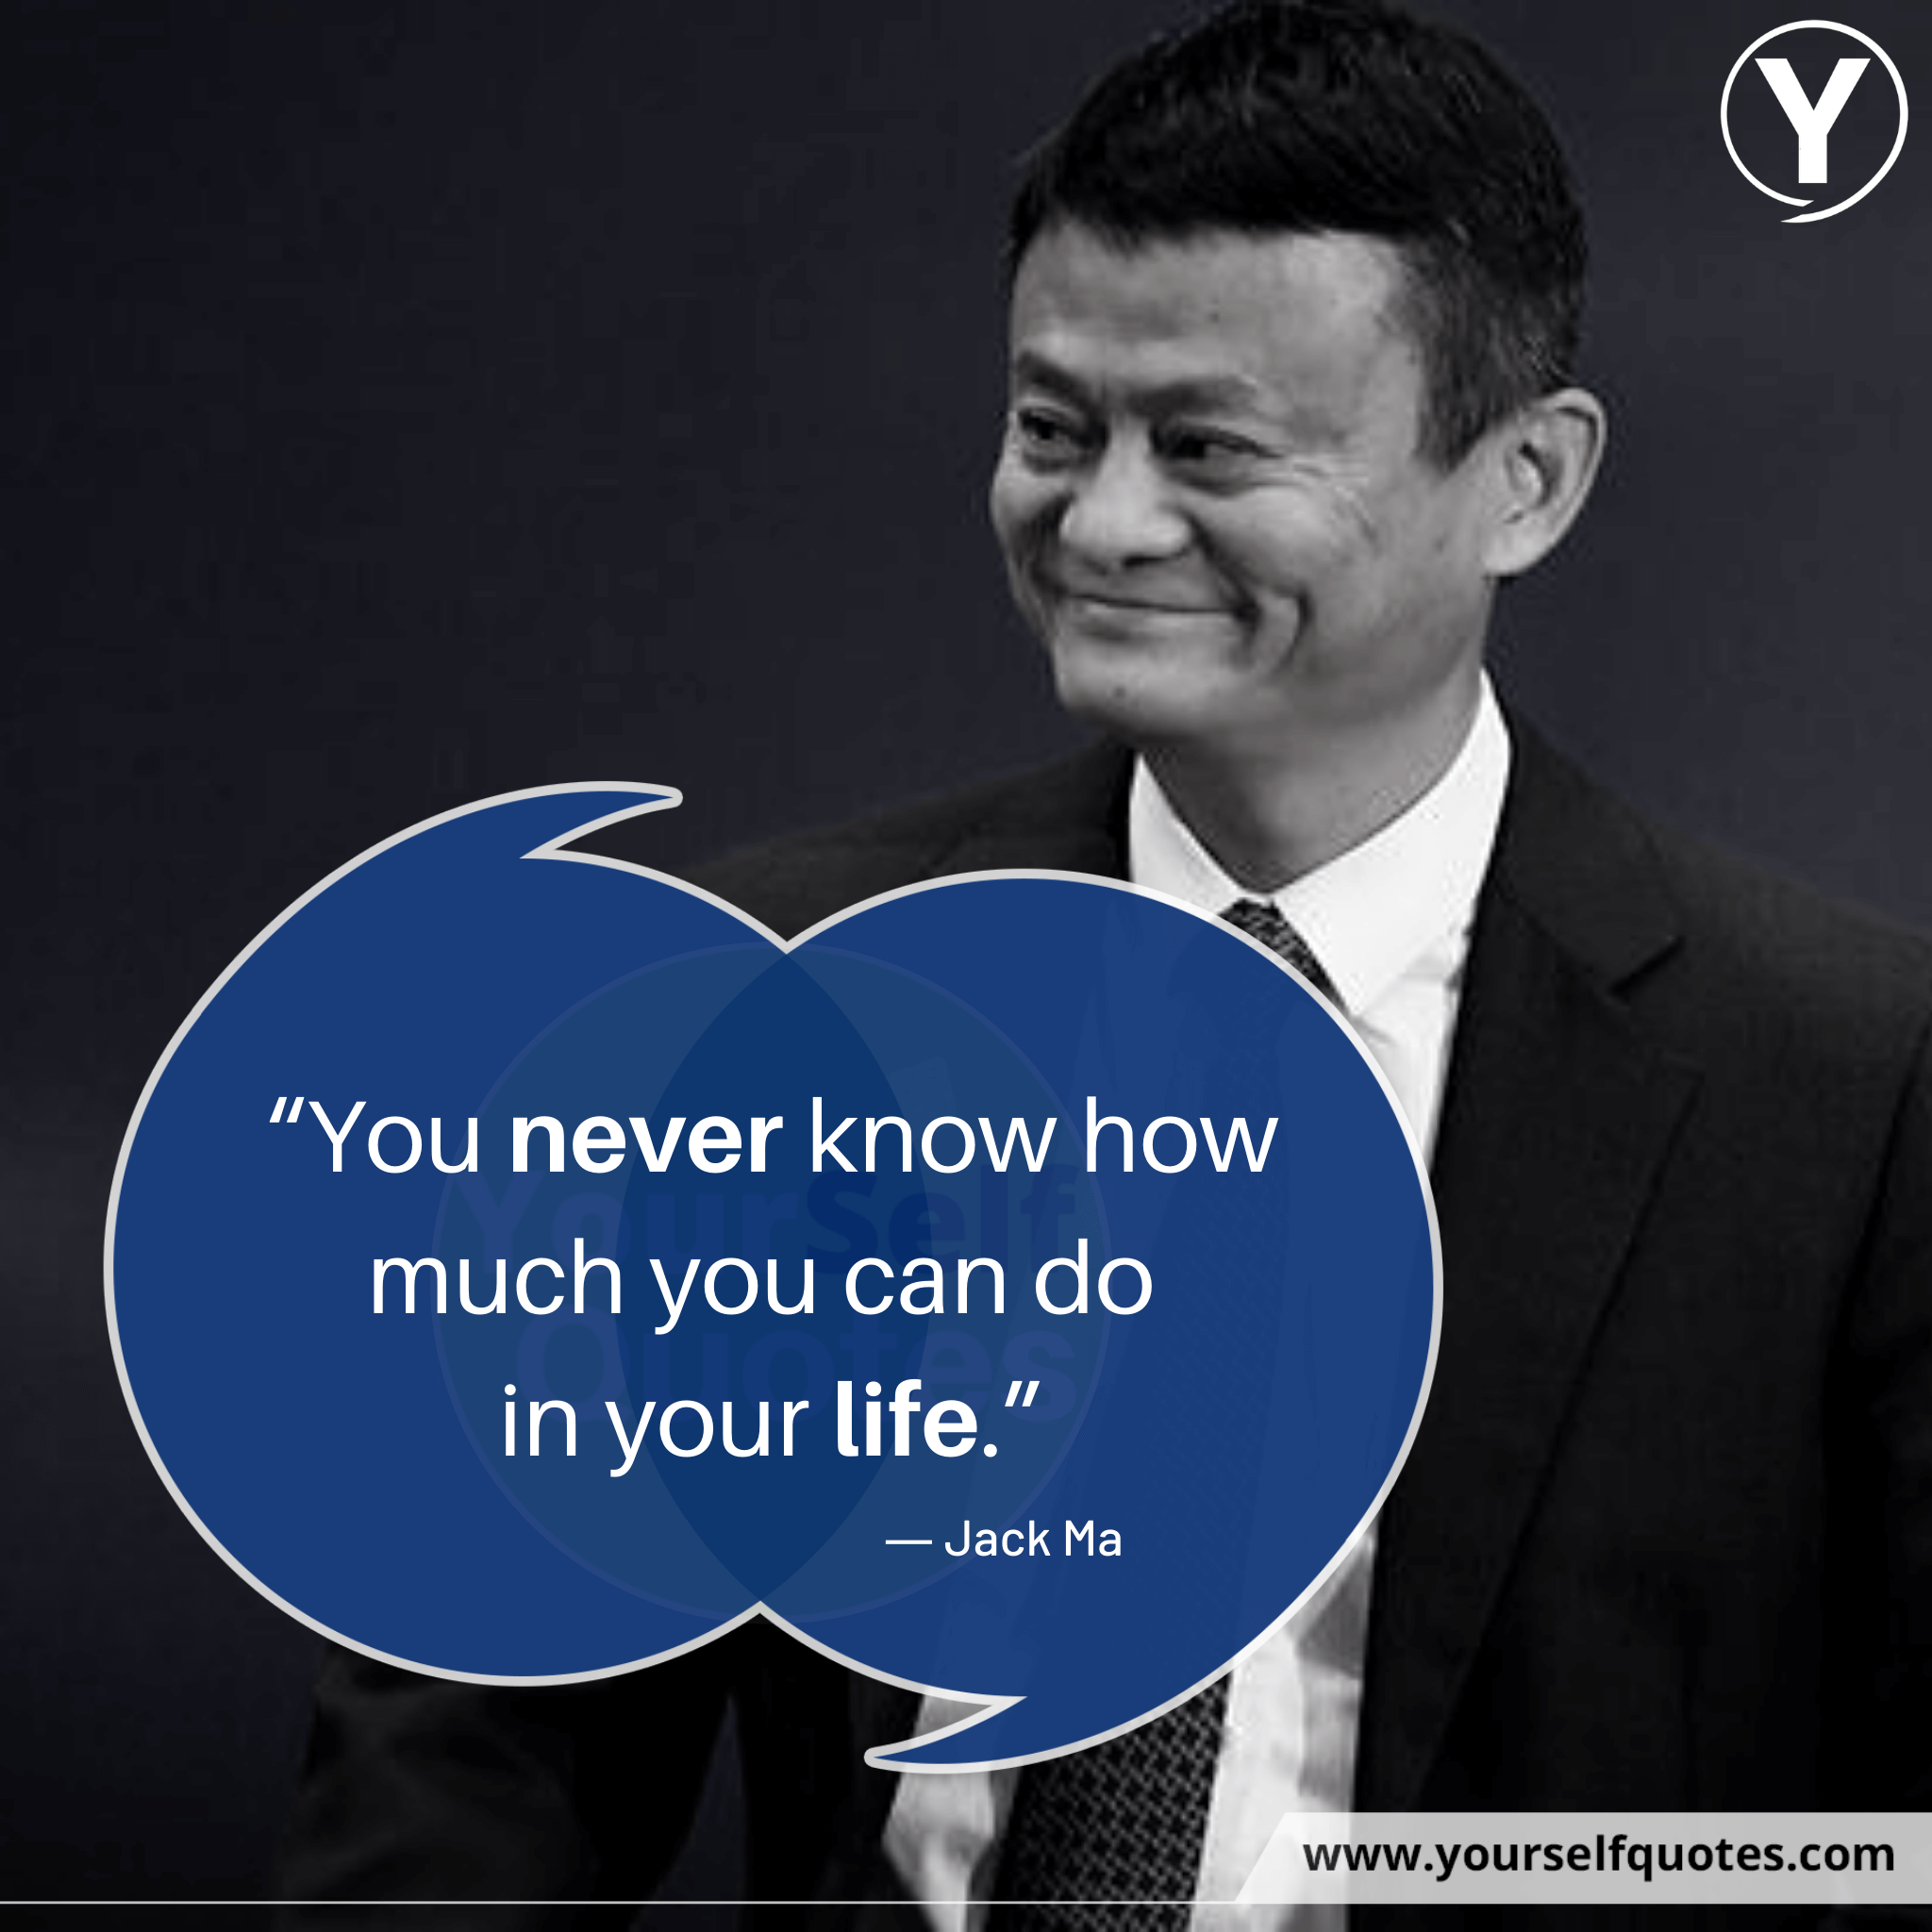 Best Jack Ma Life Quotes